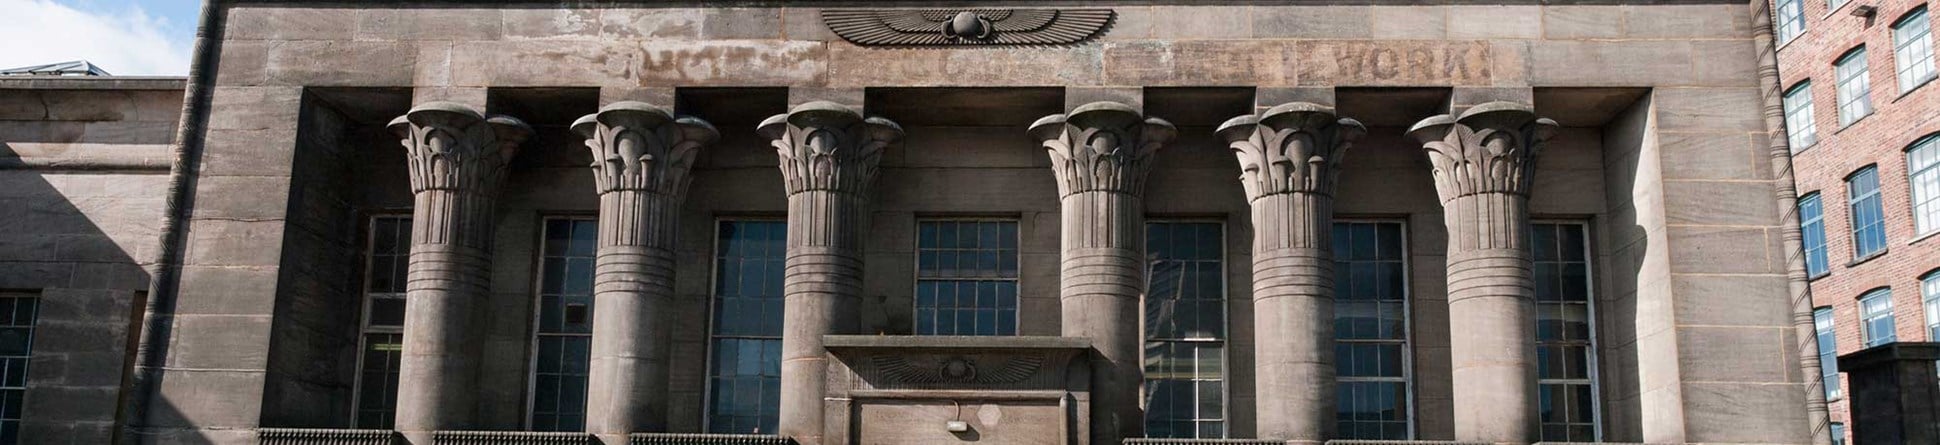 Building with Egyptian facade based on the Temple of Edfu